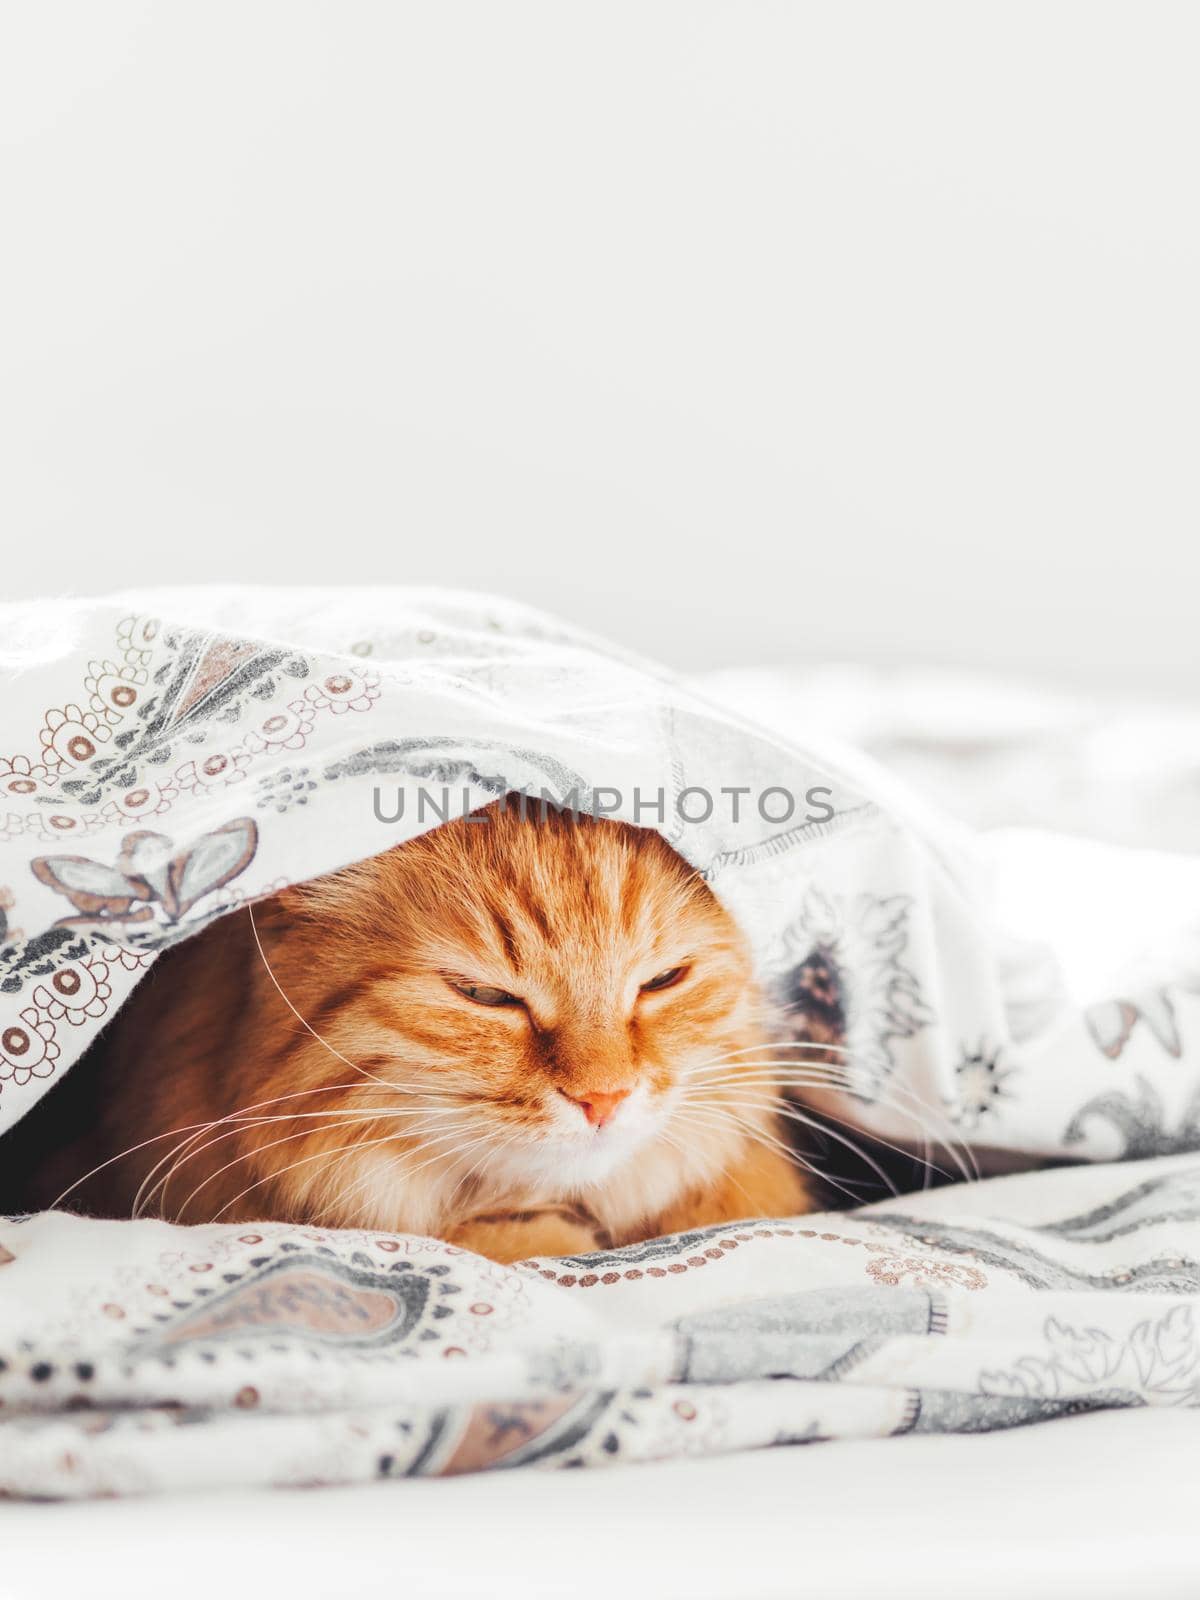 Cute ginger cat lying under blanket in bed. Fluffy pet comfortably settled to sleep. Cozy home background with copy space.